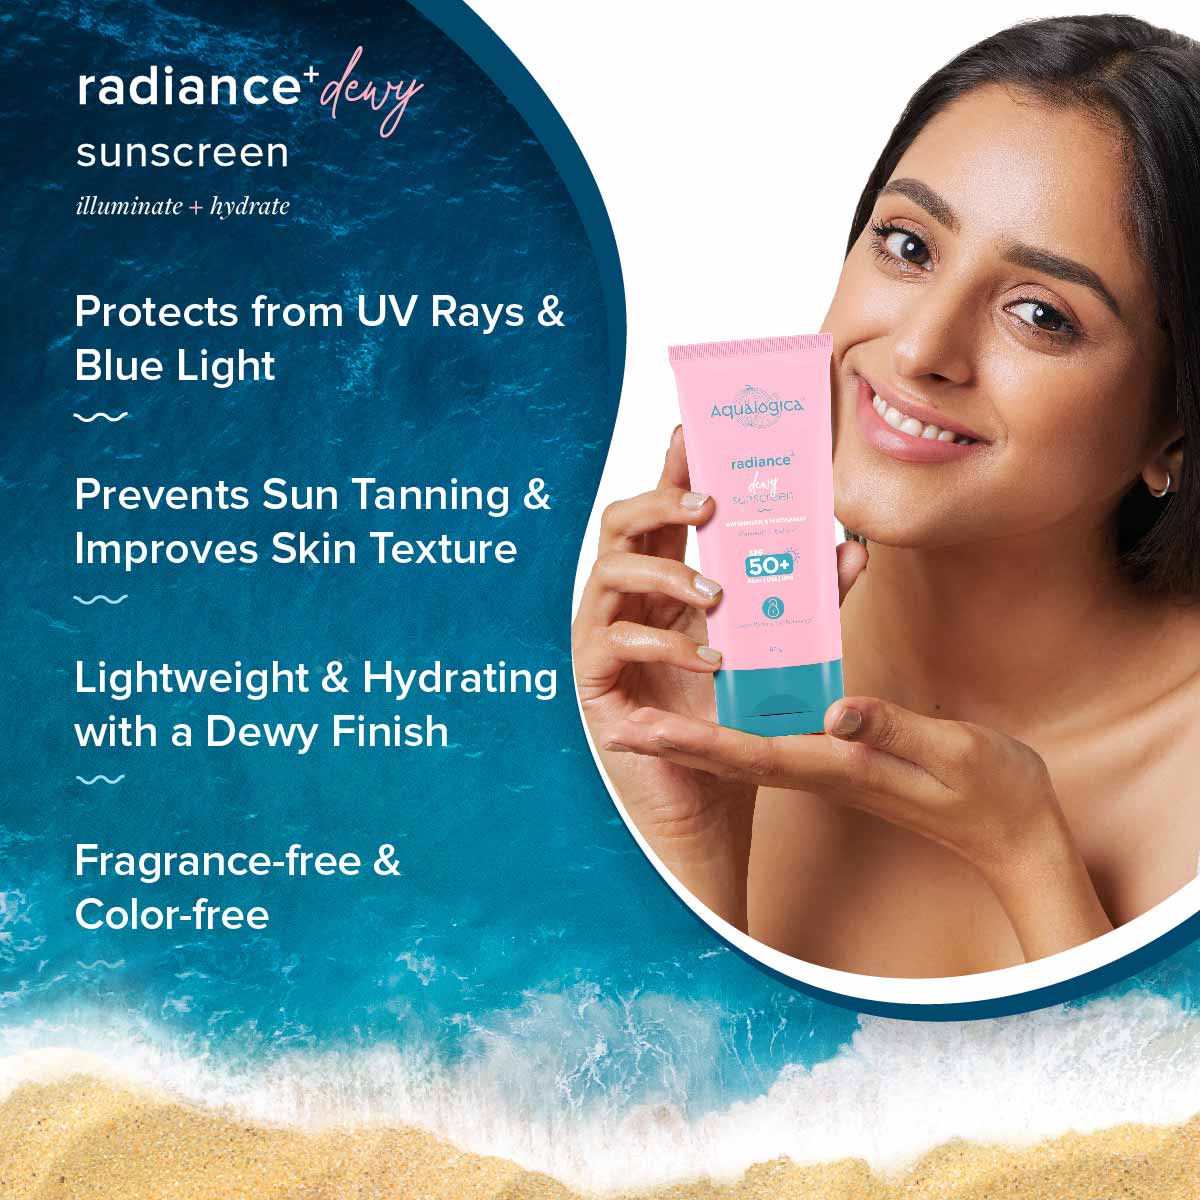 Radiance+ Dewy Sunscreen with SPF 50+ & PA+++ for UVA/B Protection & No White Cast - 80g